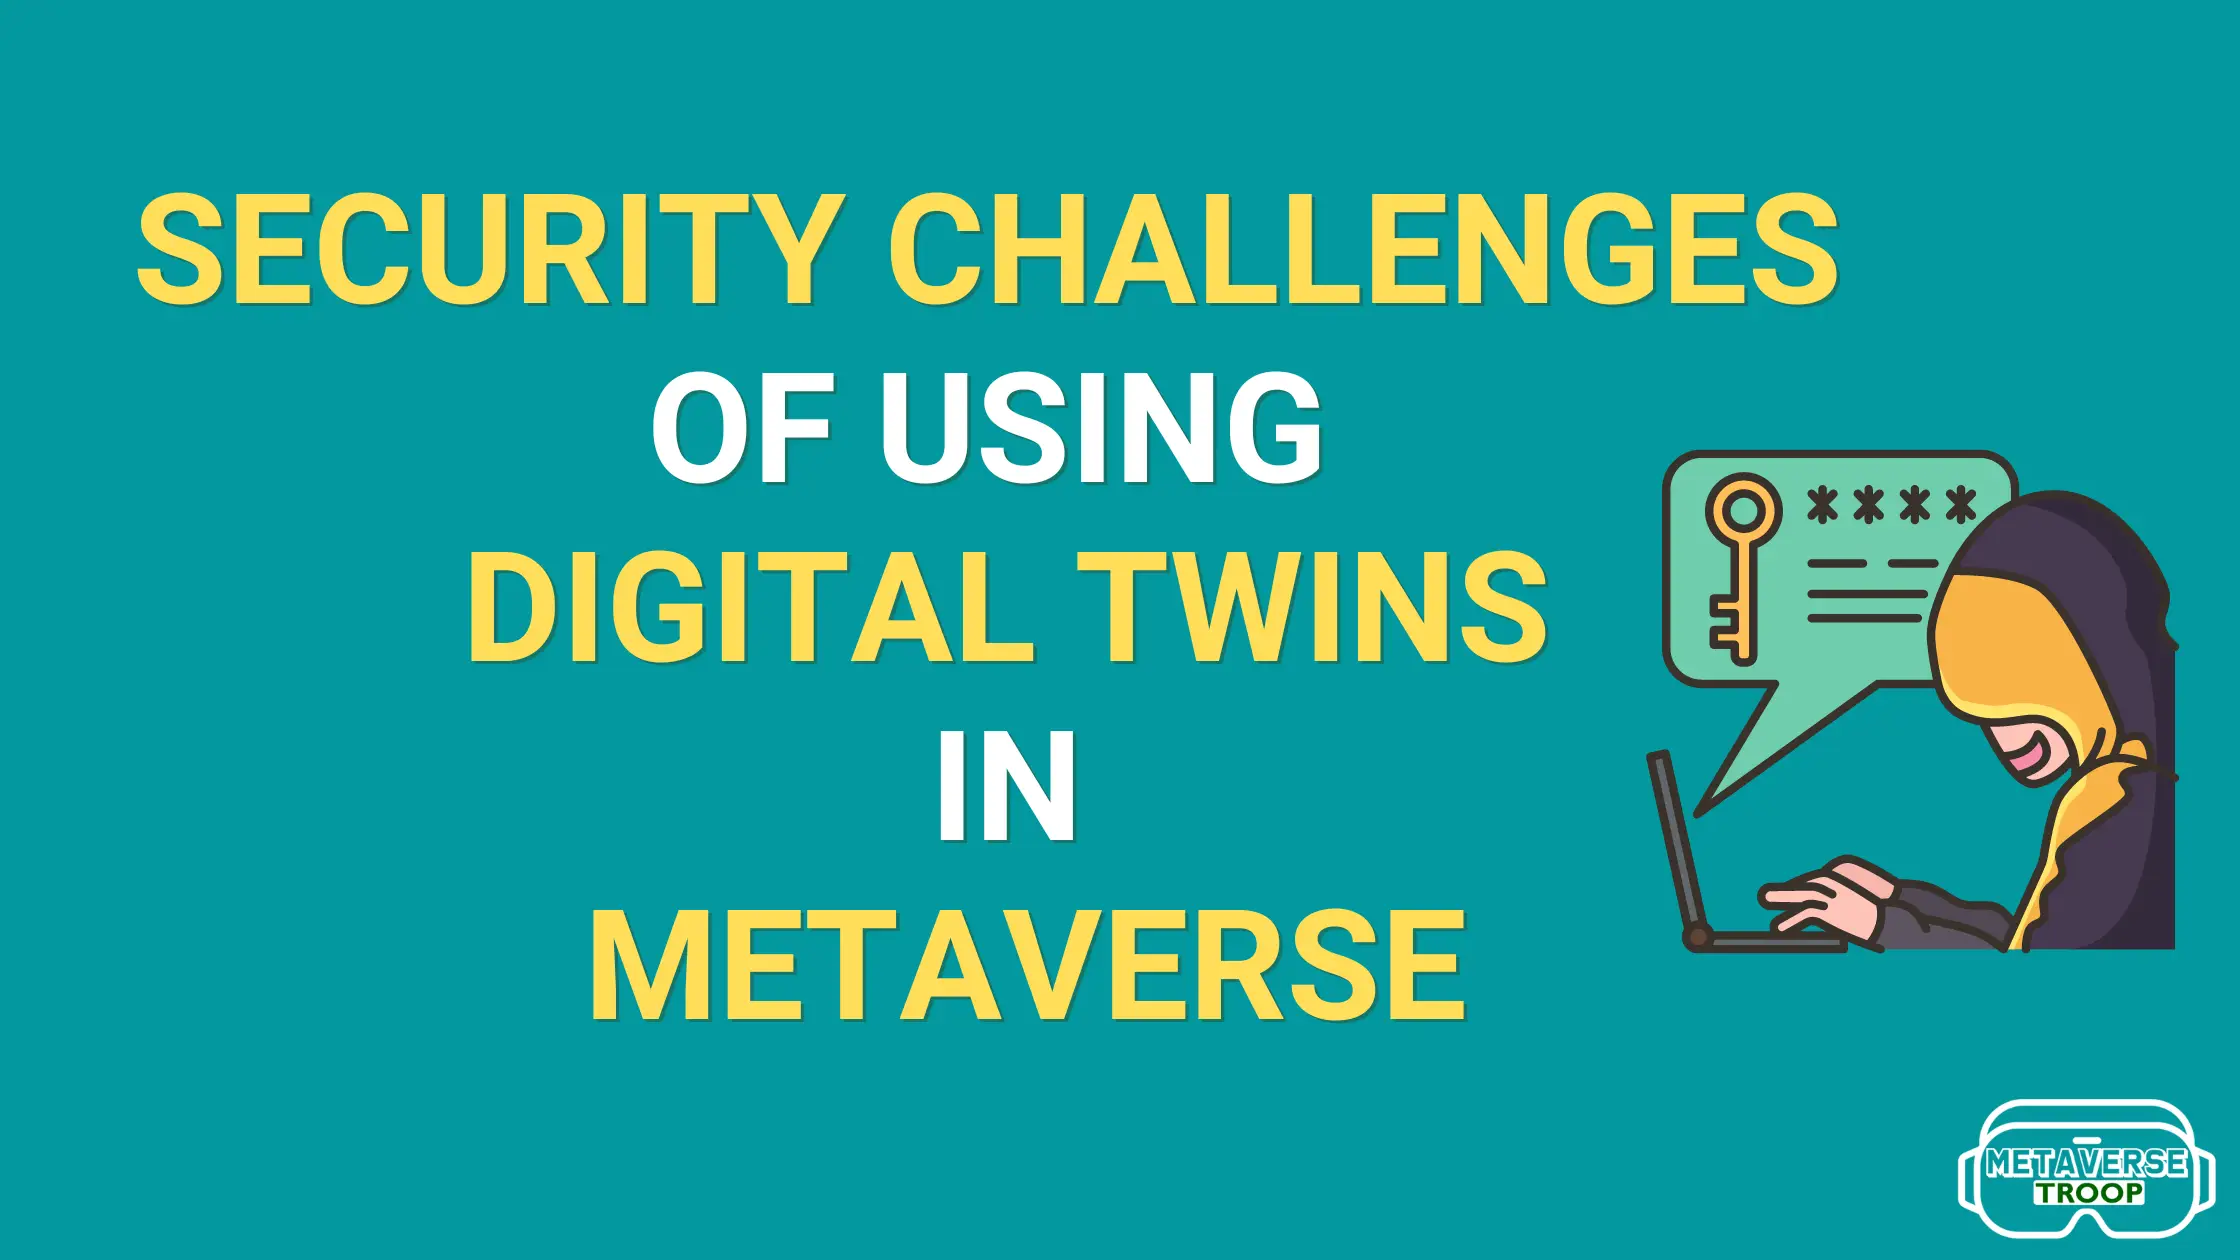 SECURITY CHALLENGES OF USING DIGITAL TWINS IN METAVERSE